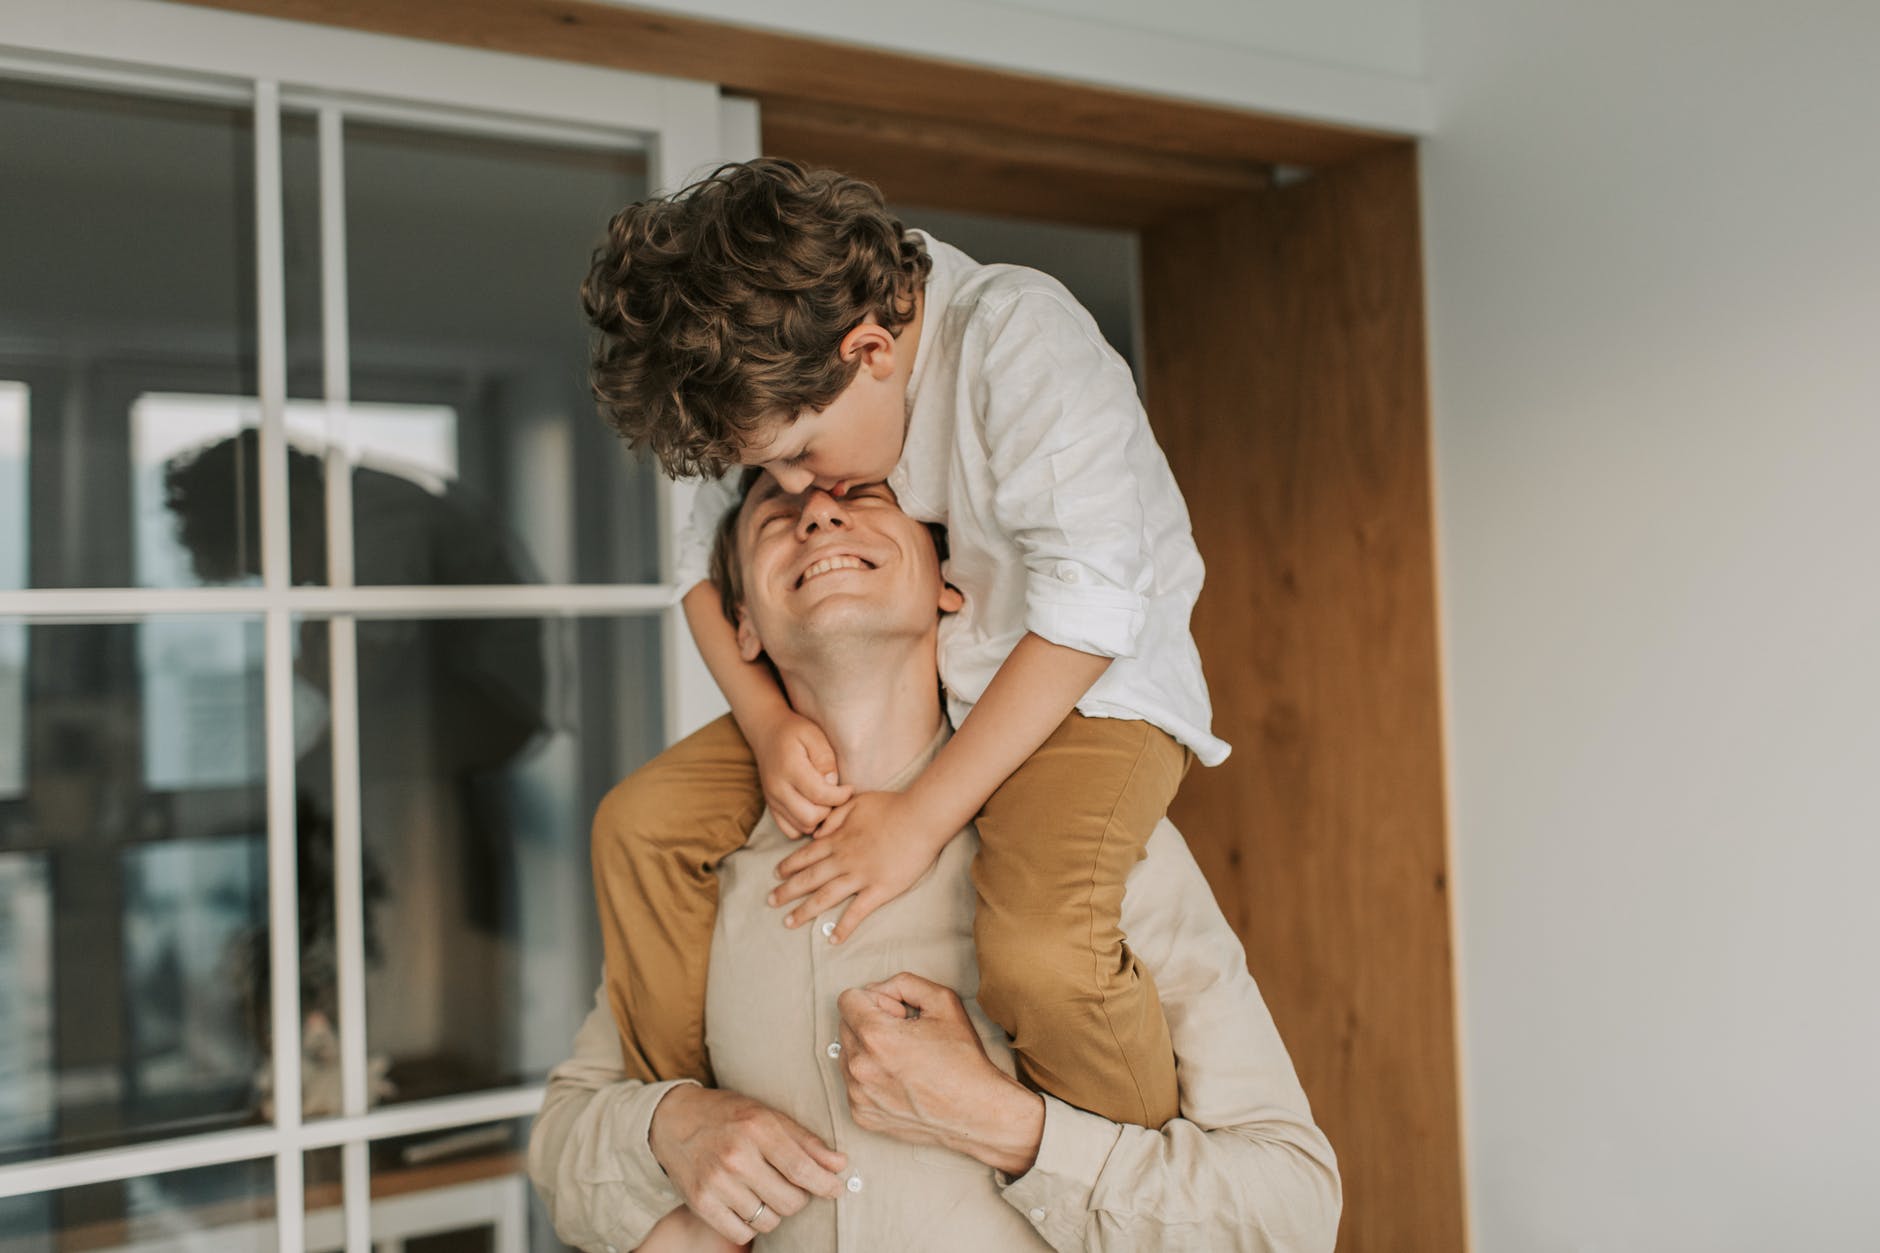 A man carrying his son on his shoulder | Photo: Pexels